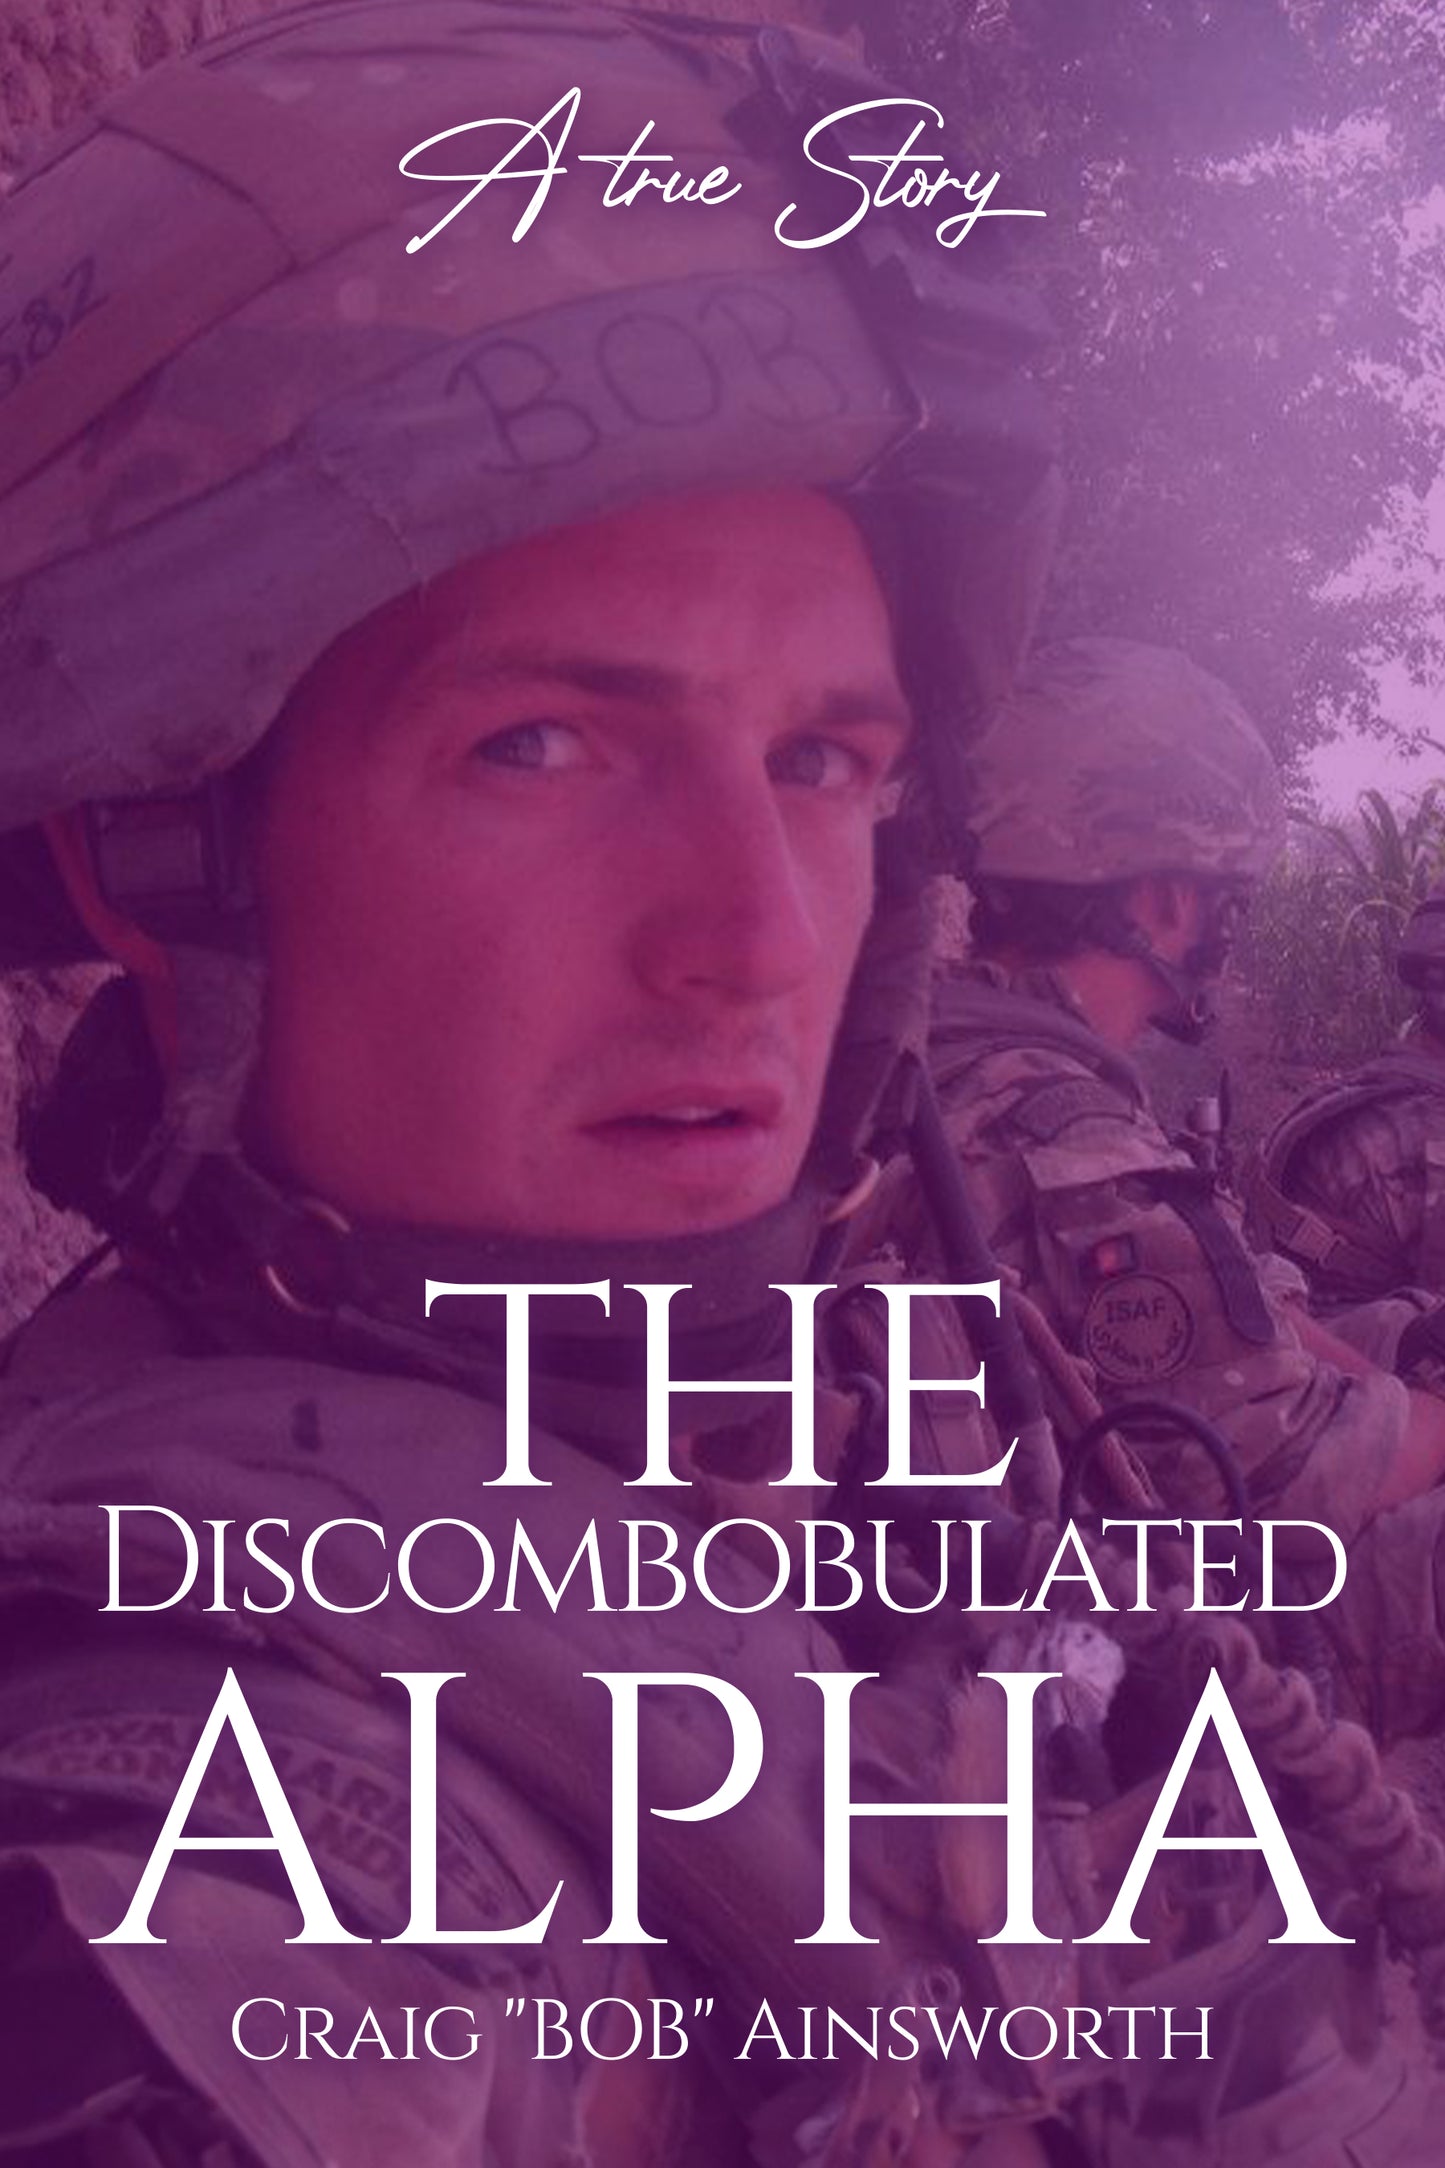 Z - Signed Copy of 'The Discombobulated Alpha' - By Craig 'Bob' Ainsworth (Biography)